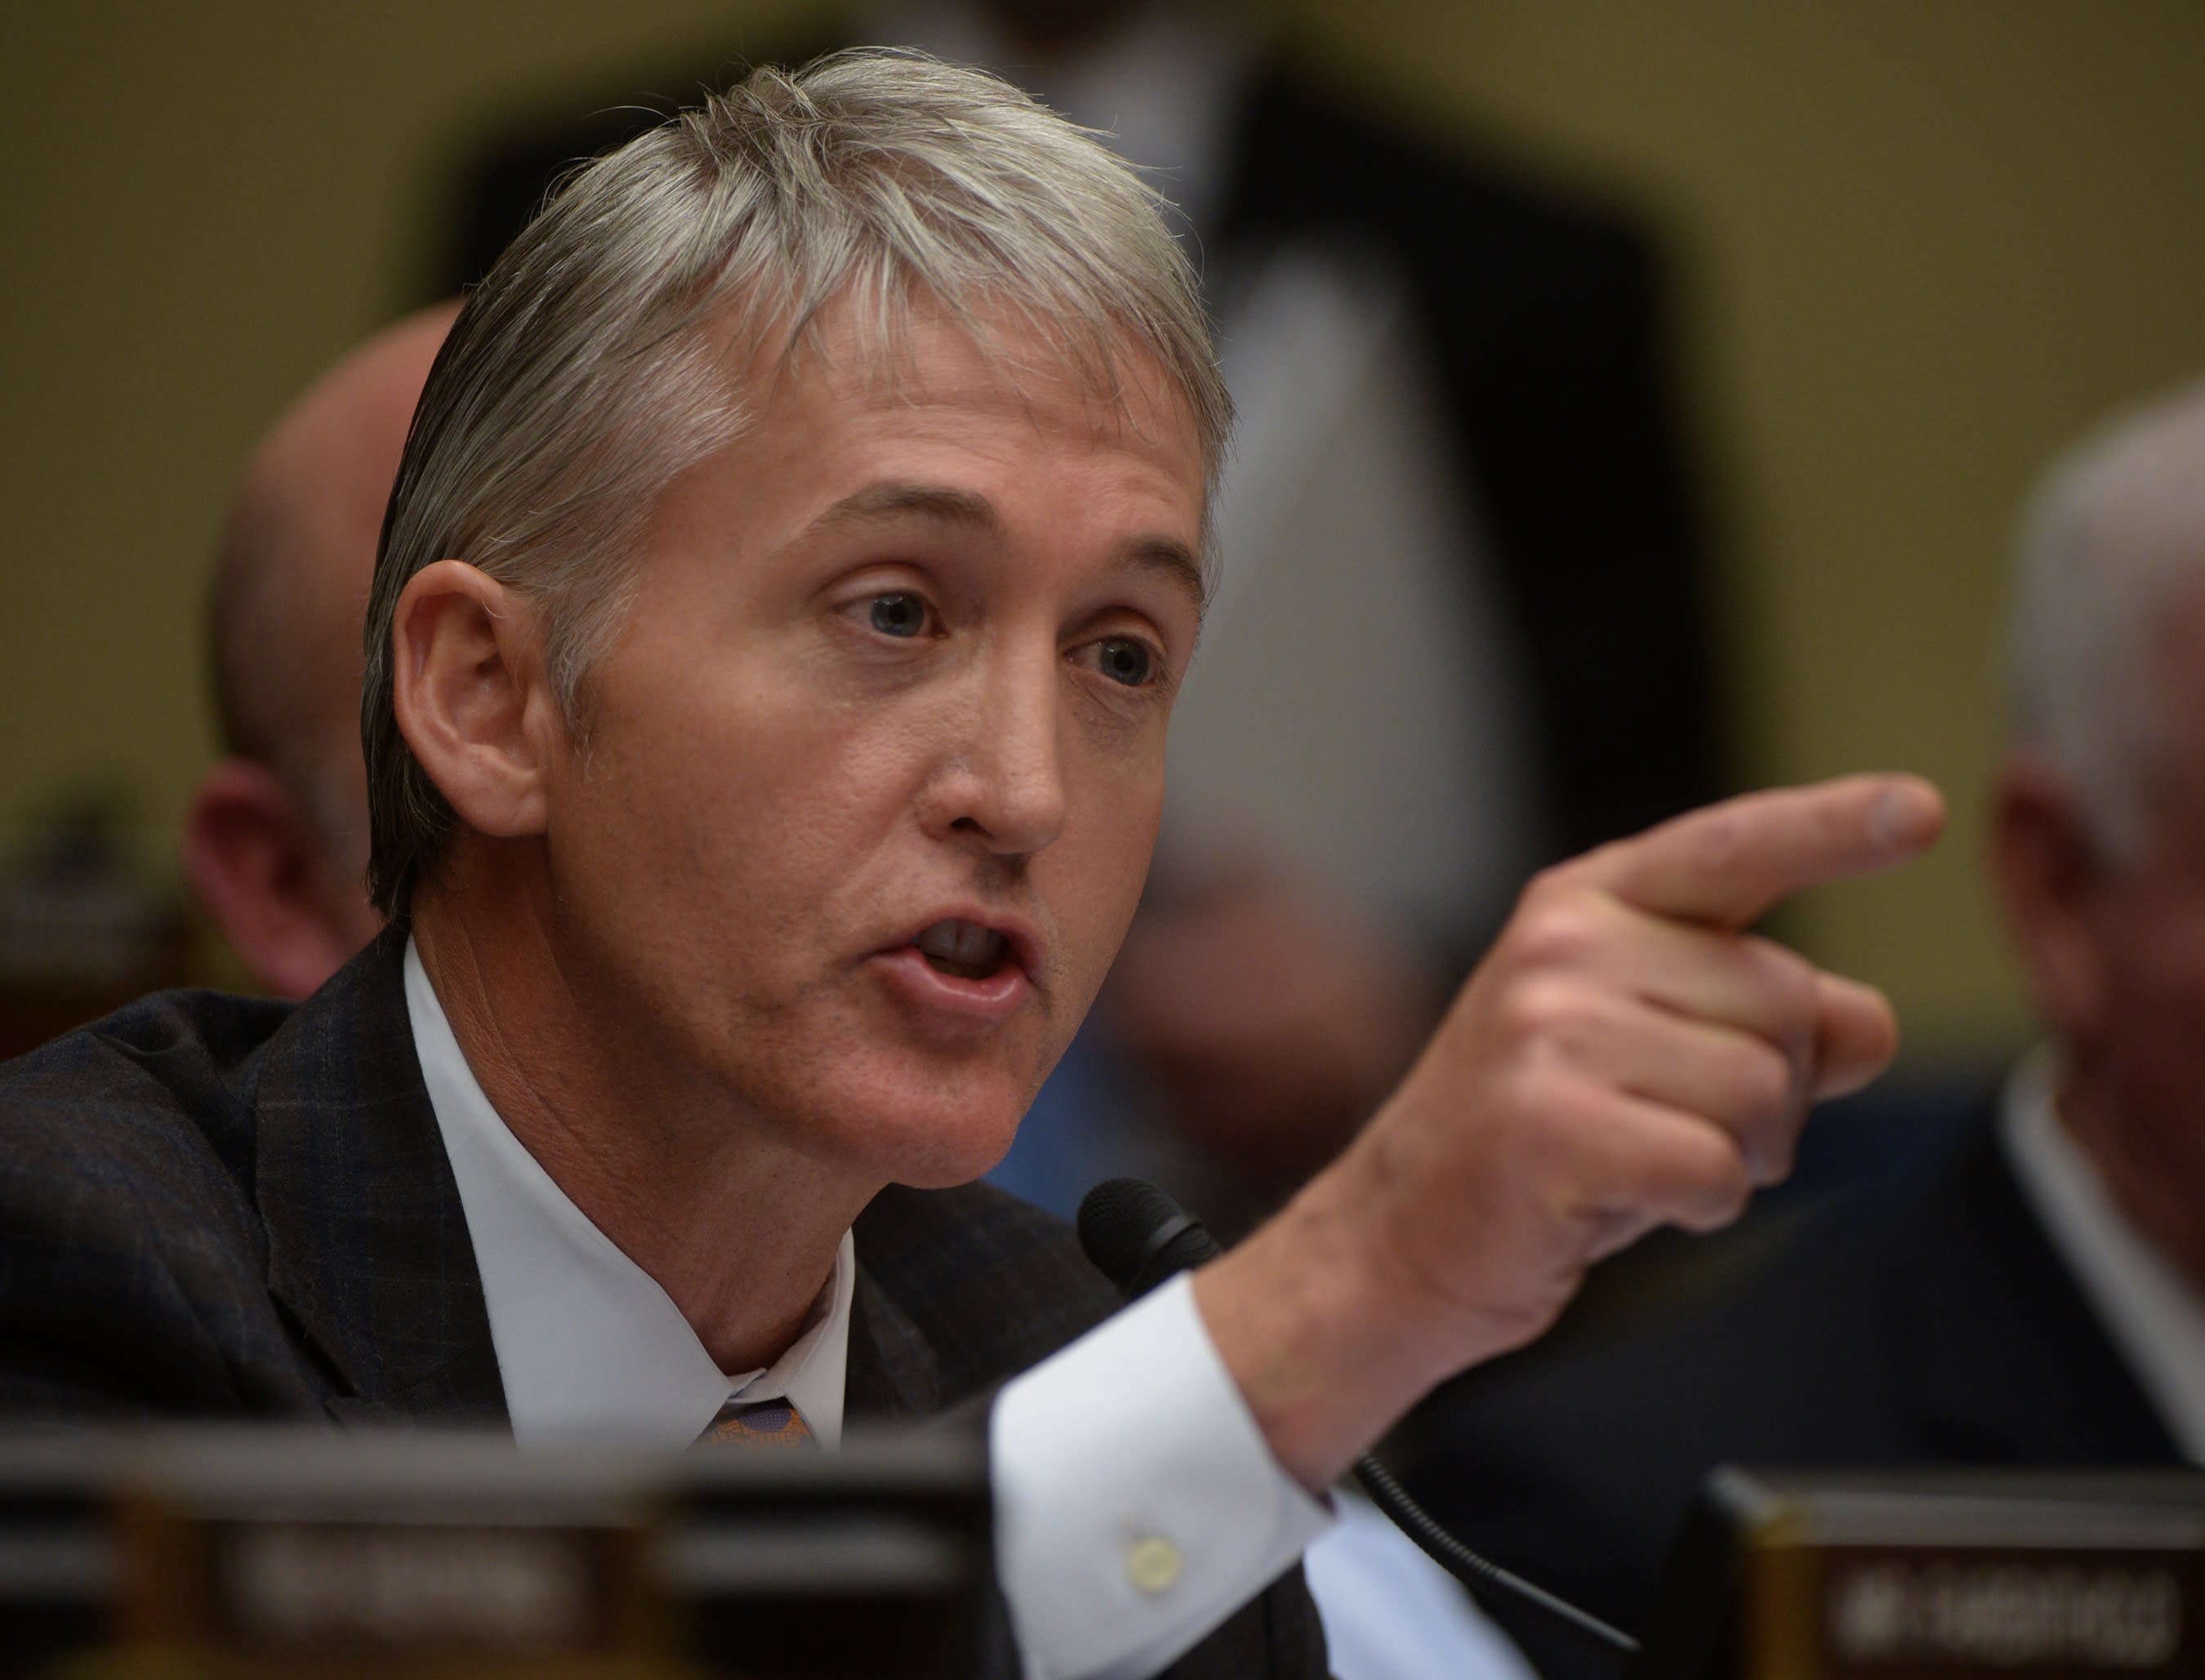 Trey Gowdy Has a History of Questionable Haircuts